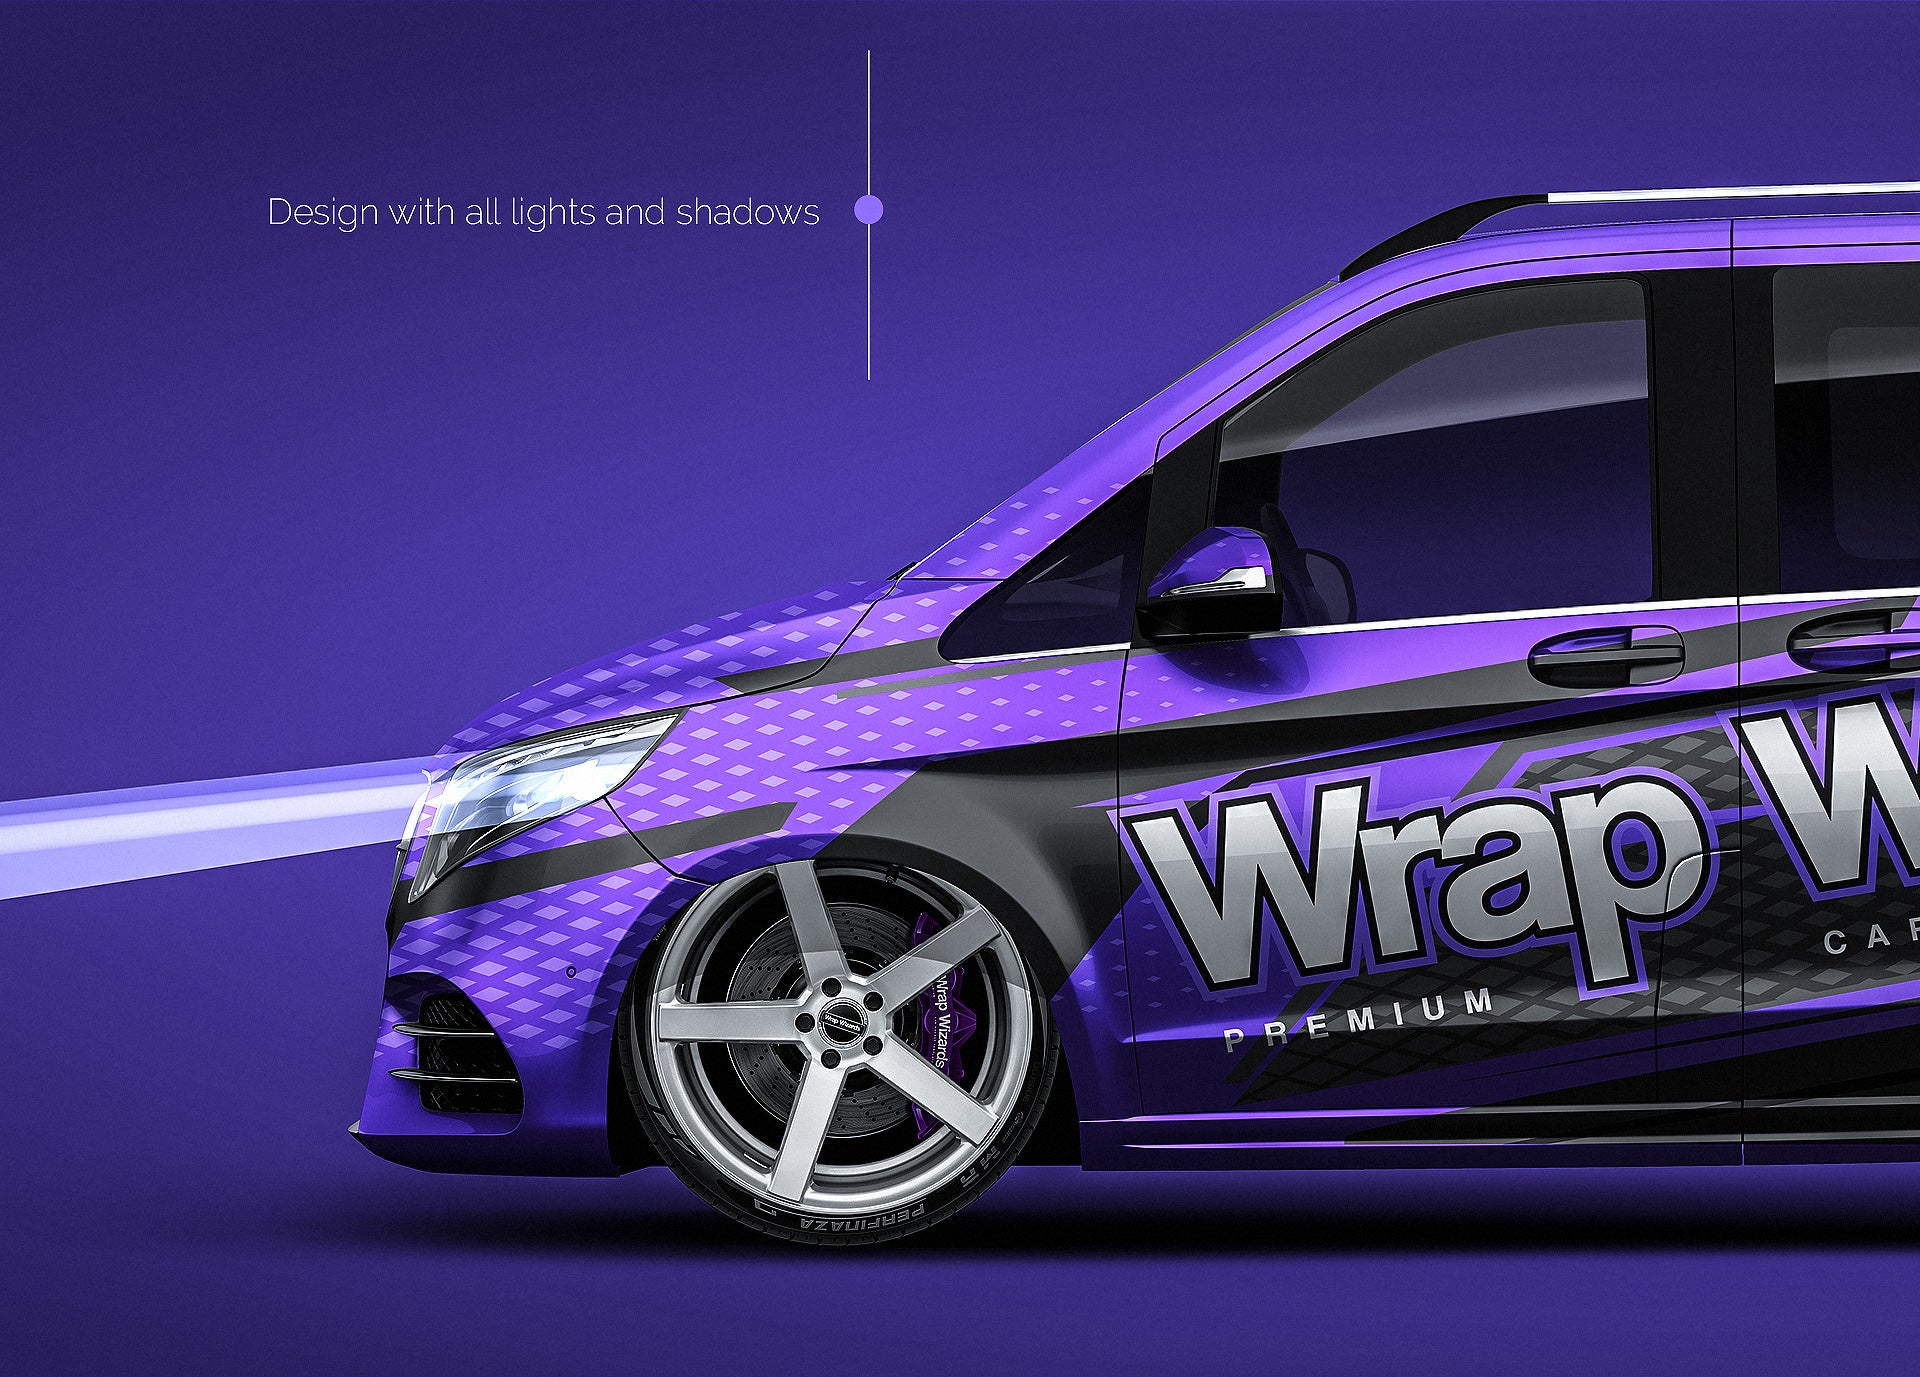 Mercedes-Benz V-Class AMG 2020 glossy finish - all sides Car Mockup Template.psd